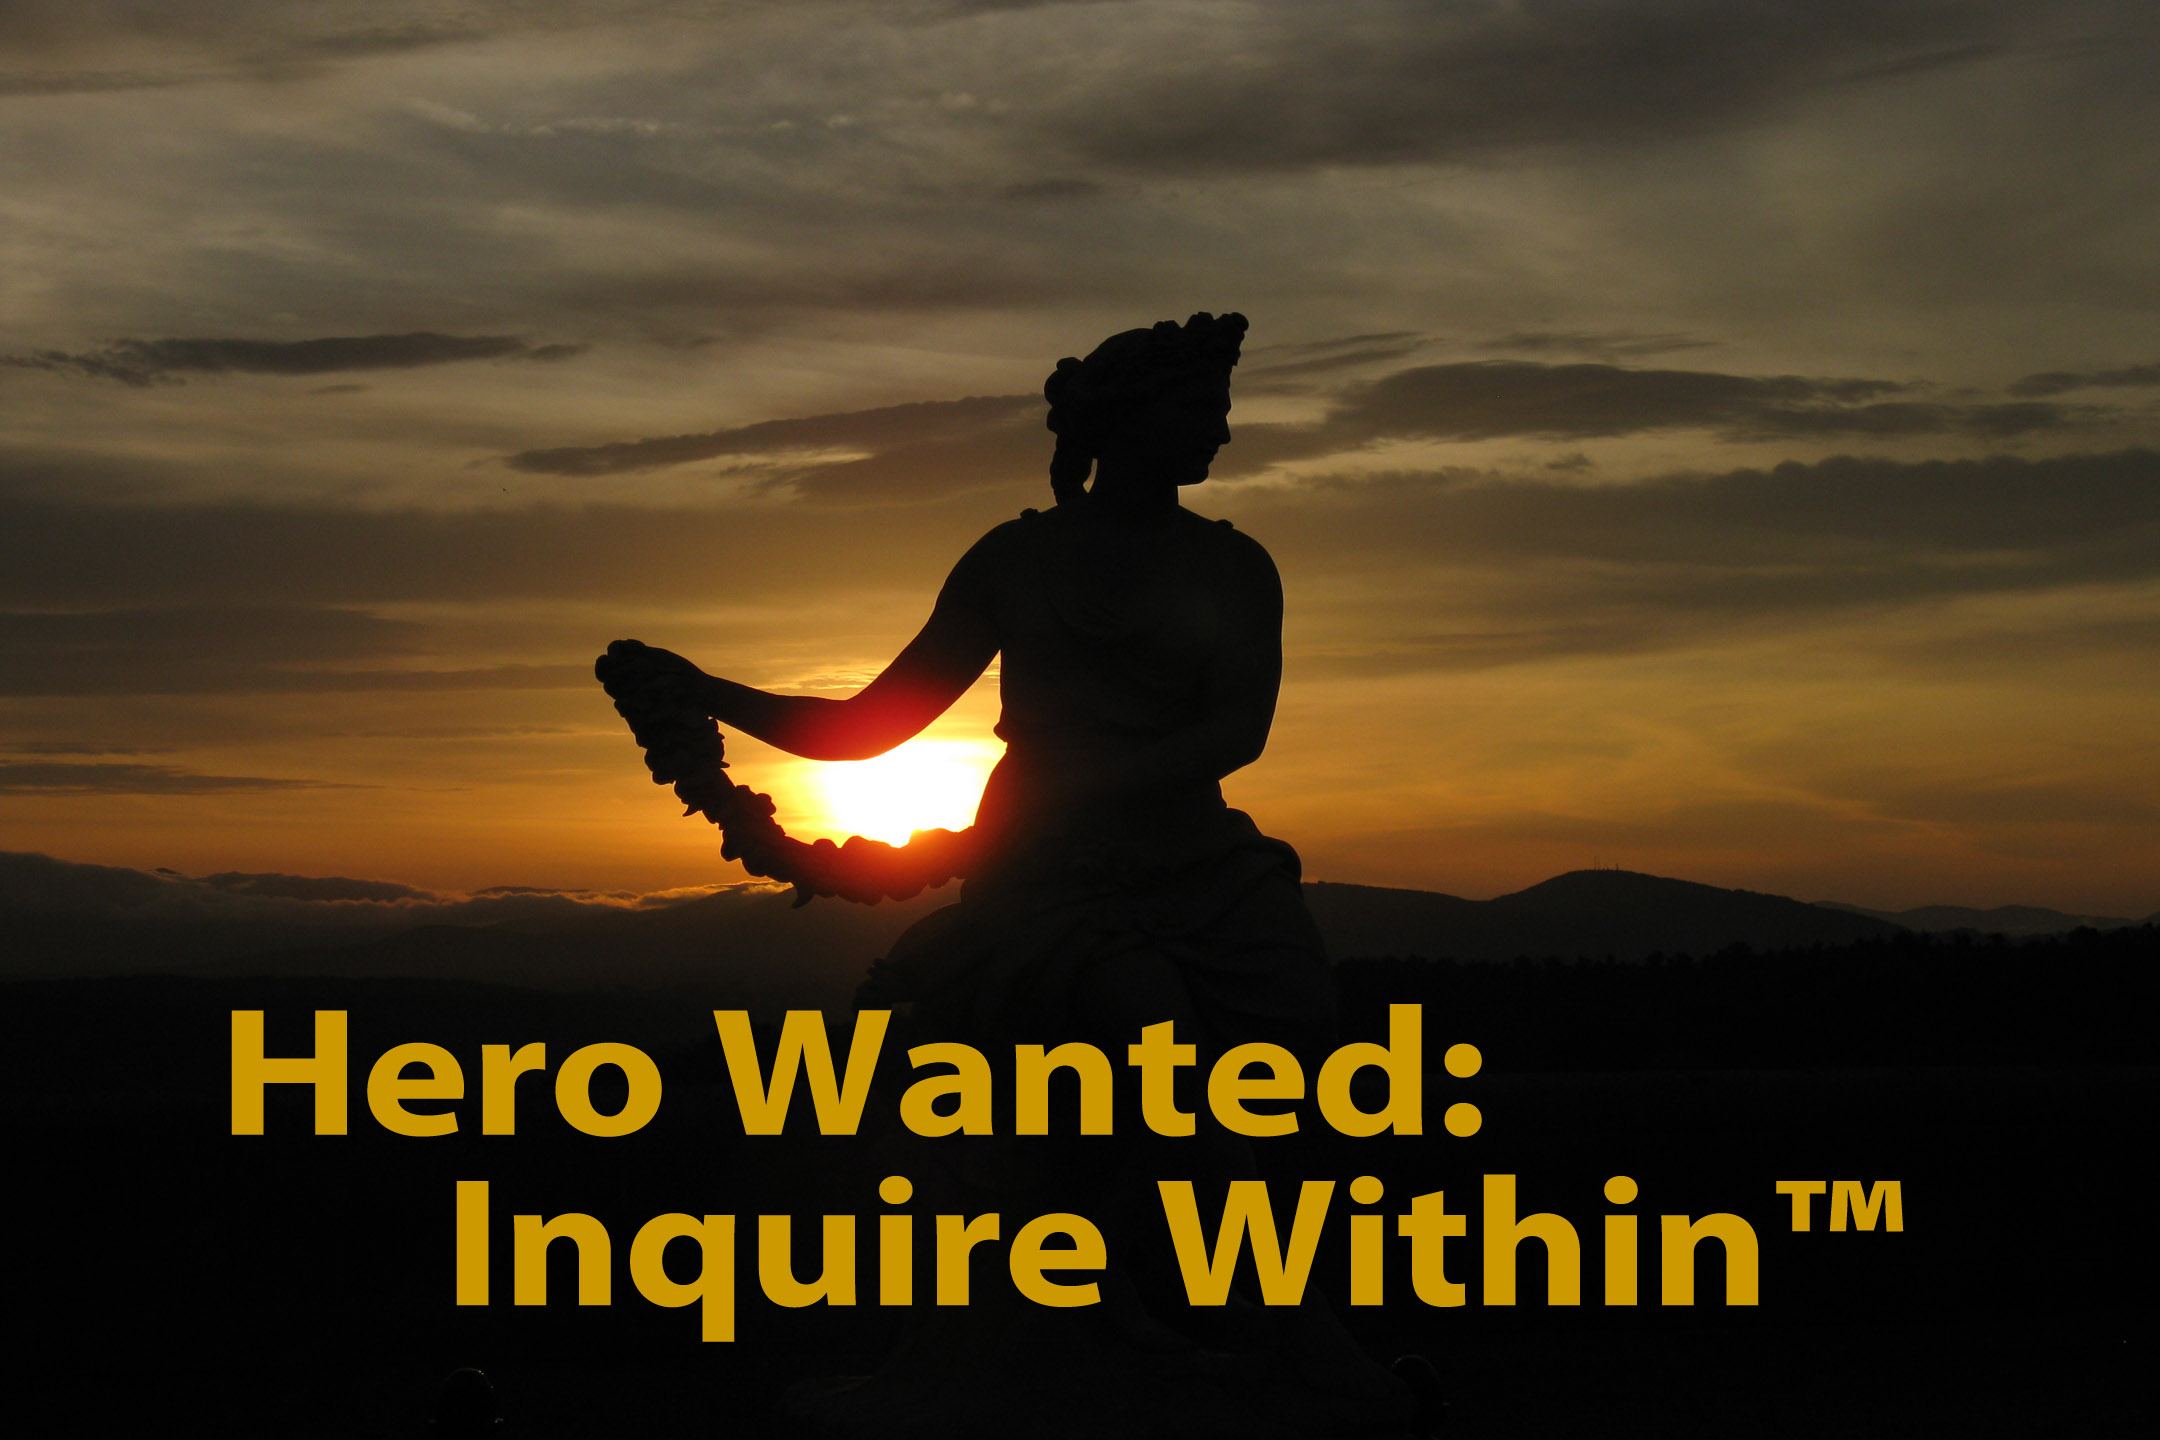 When heroes are hard to find, you must become your own Hero. Hero Wanted: Inquire Within is a guide to reclaiming your own inner Hero. http://innerhero.wordpress.com